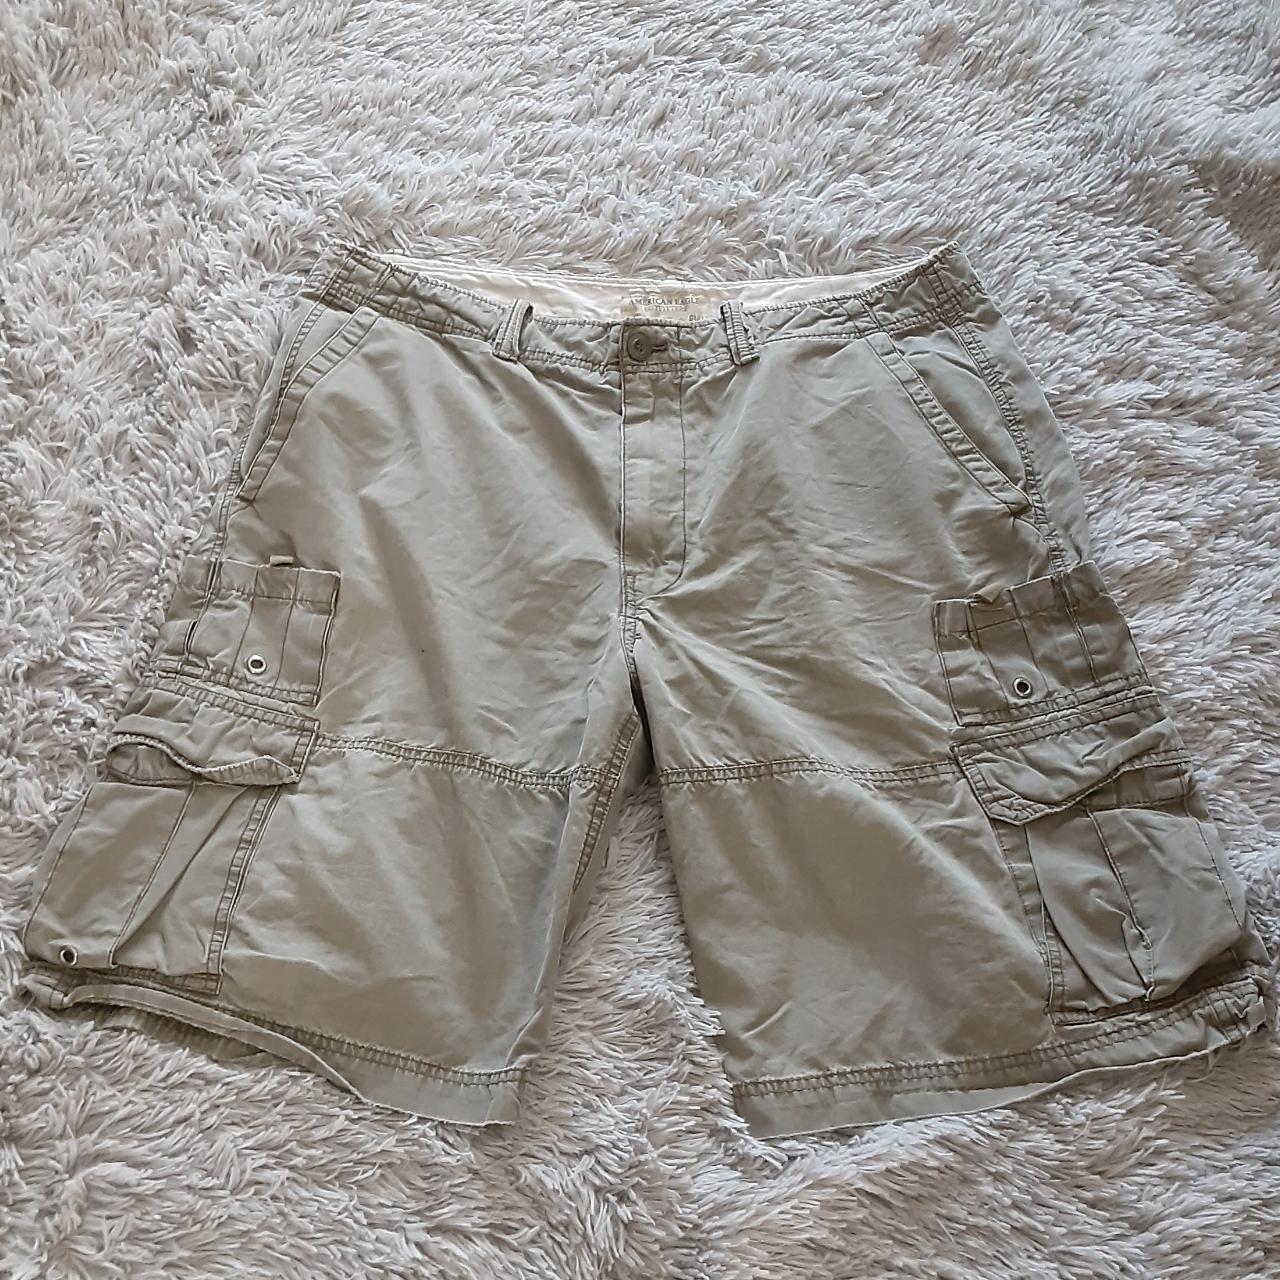 American Eagle Men's Cargo Shorts Early 2000s Style... - Depop